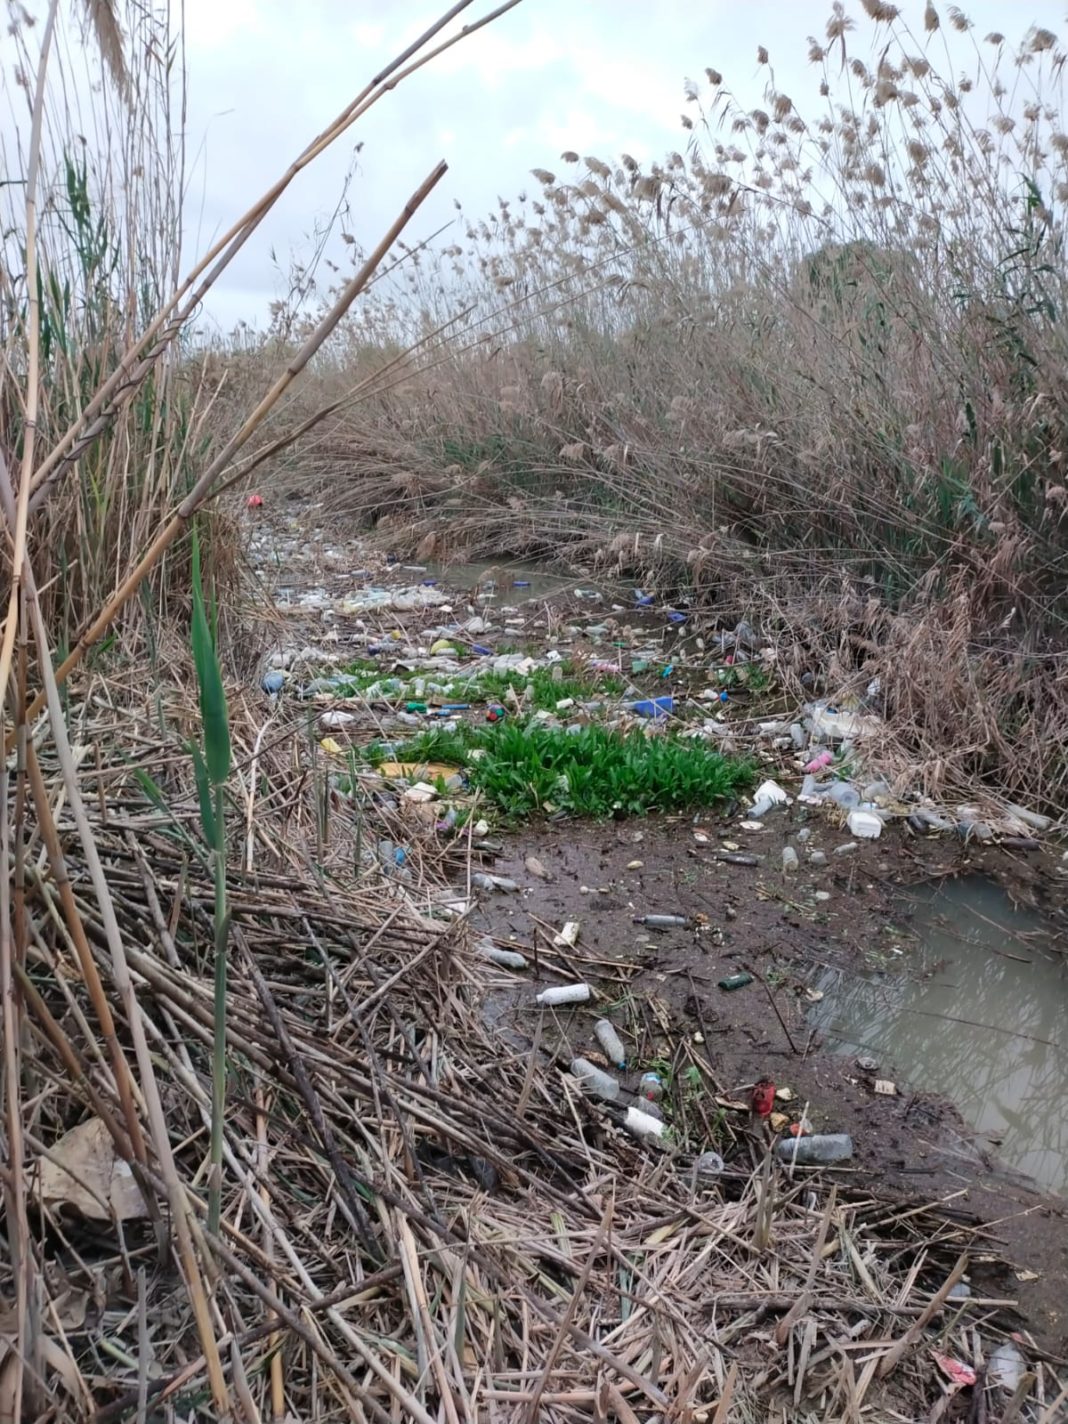 sadly the banks and the river itself are in a very poor state due to the amount of rubbish that collects there